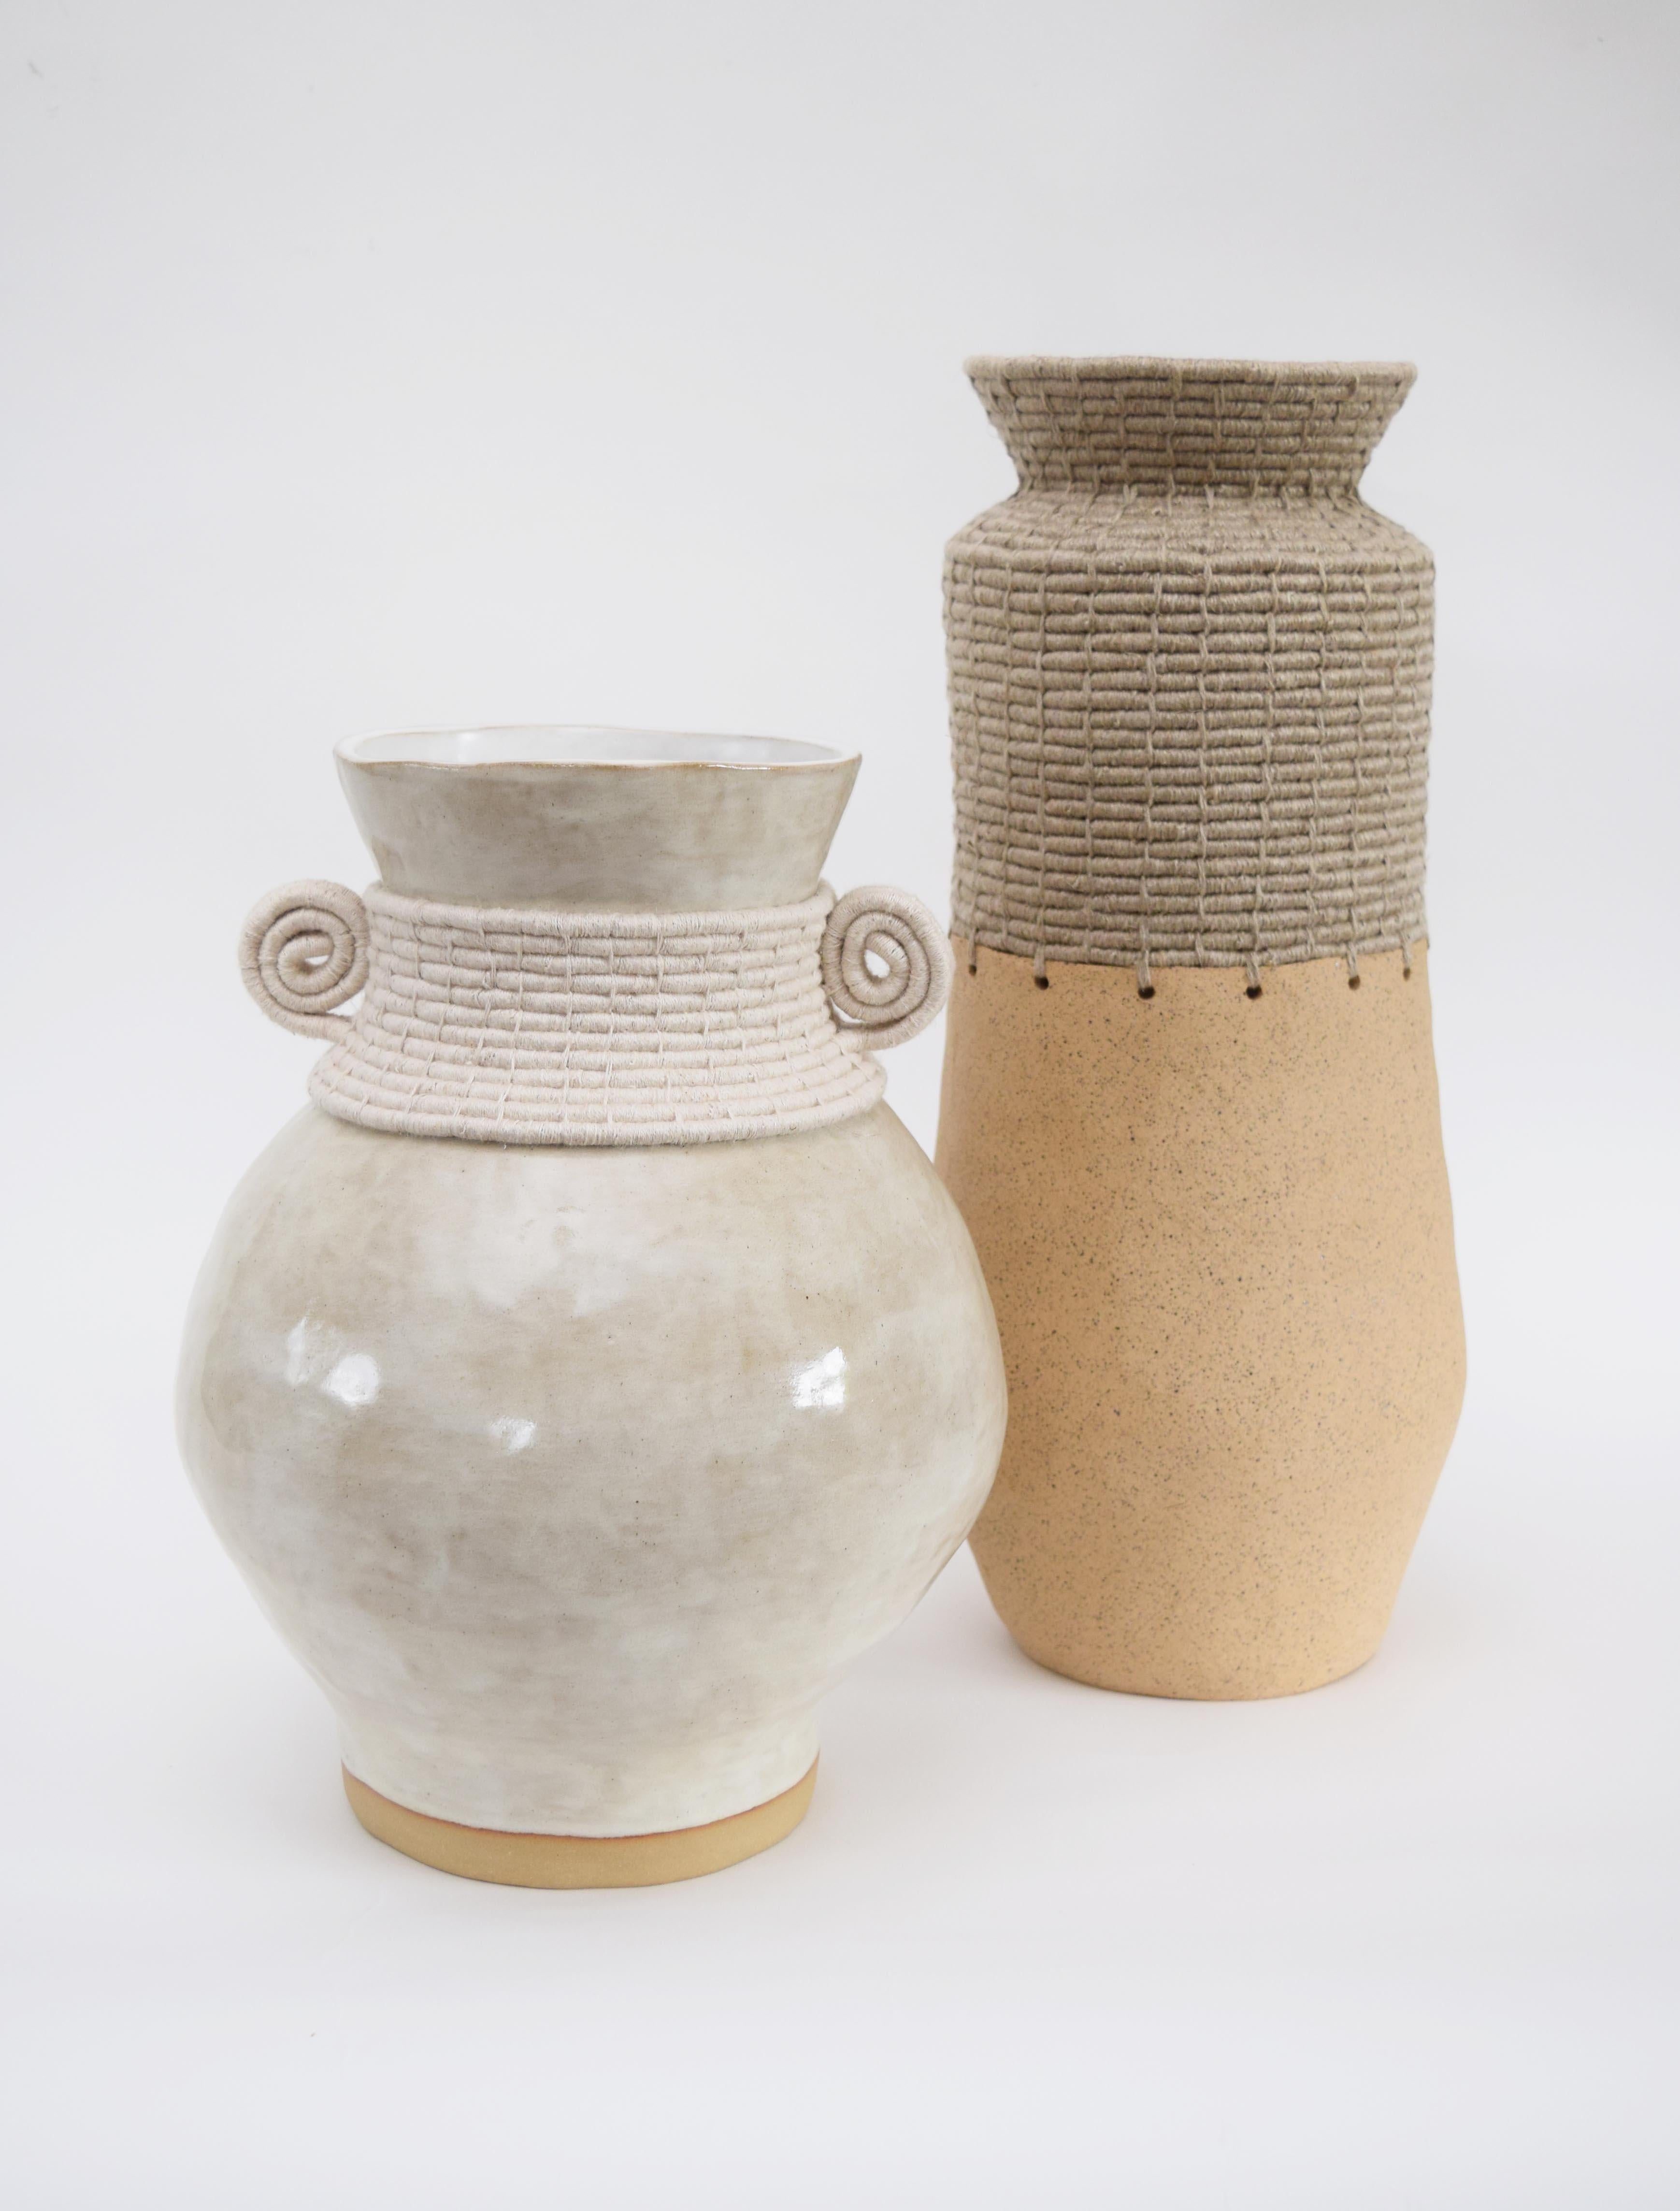 Contemporary One of a Kind Handmade Ceramic Vase #796 - Off White Glaze & Woven Cotton Detail